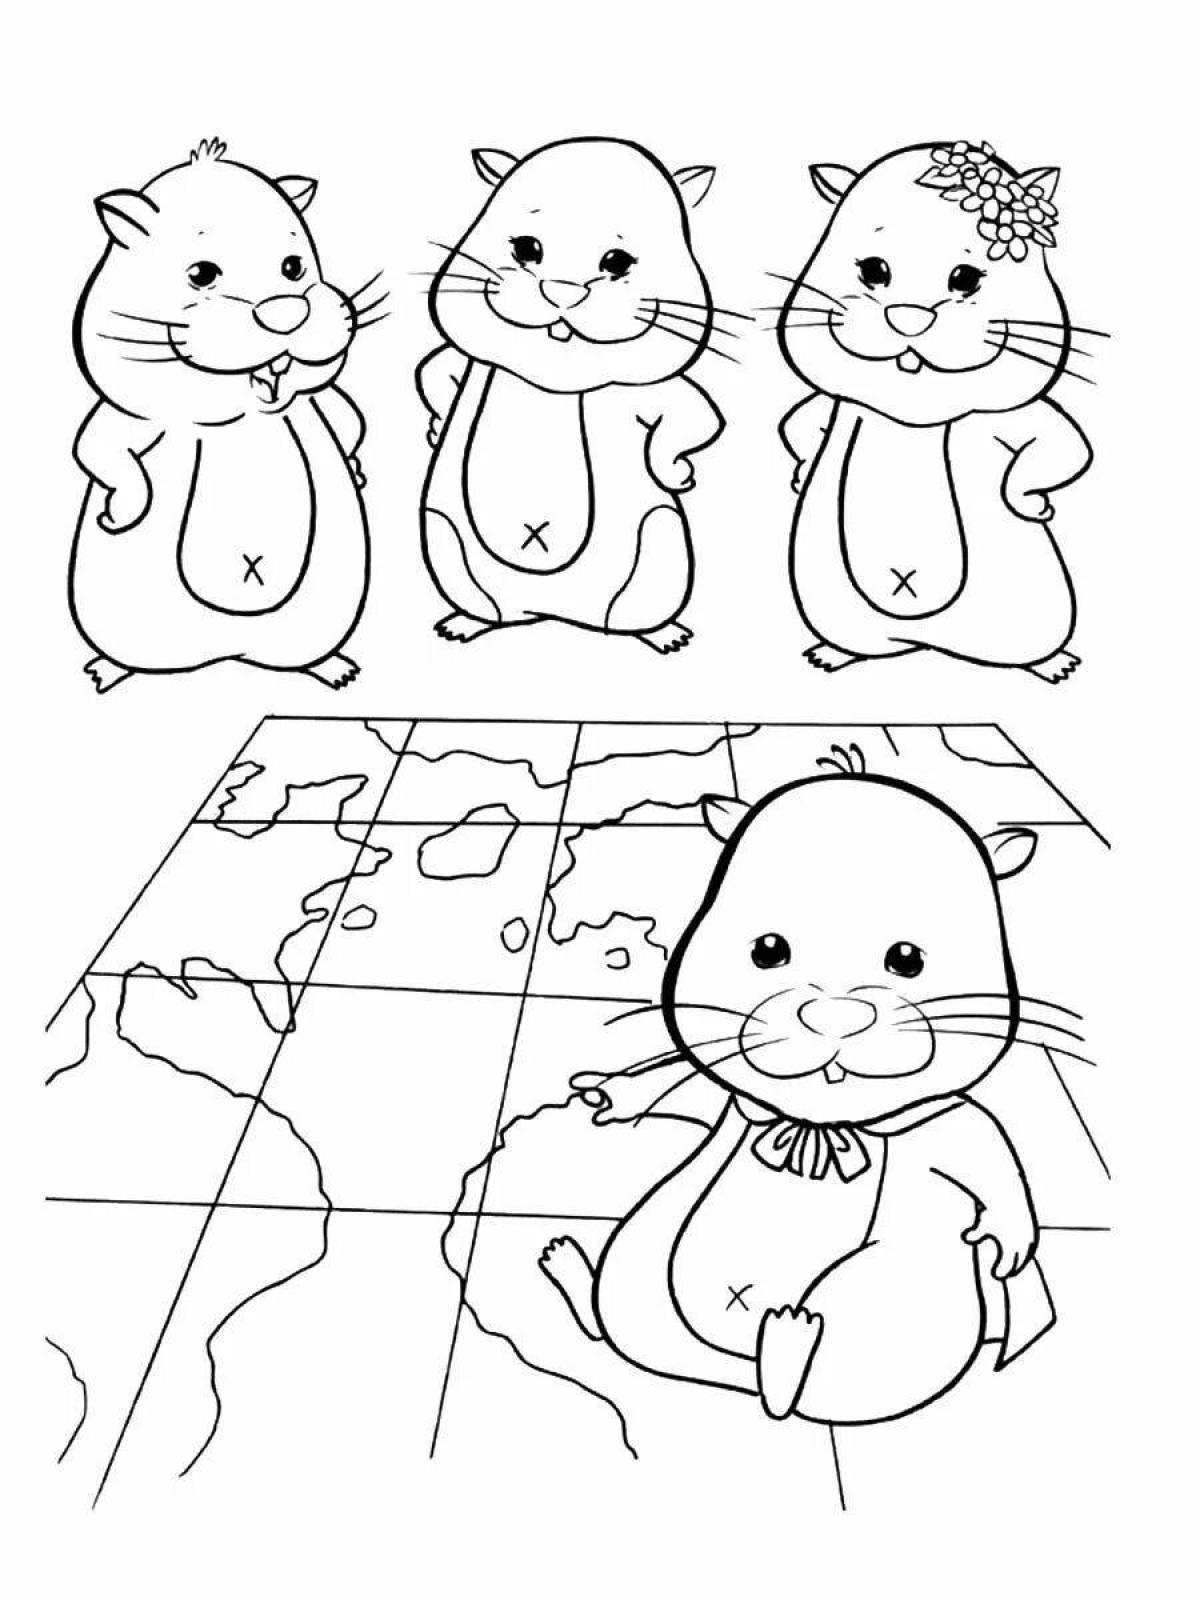 Coloring page cute hamster in a cage